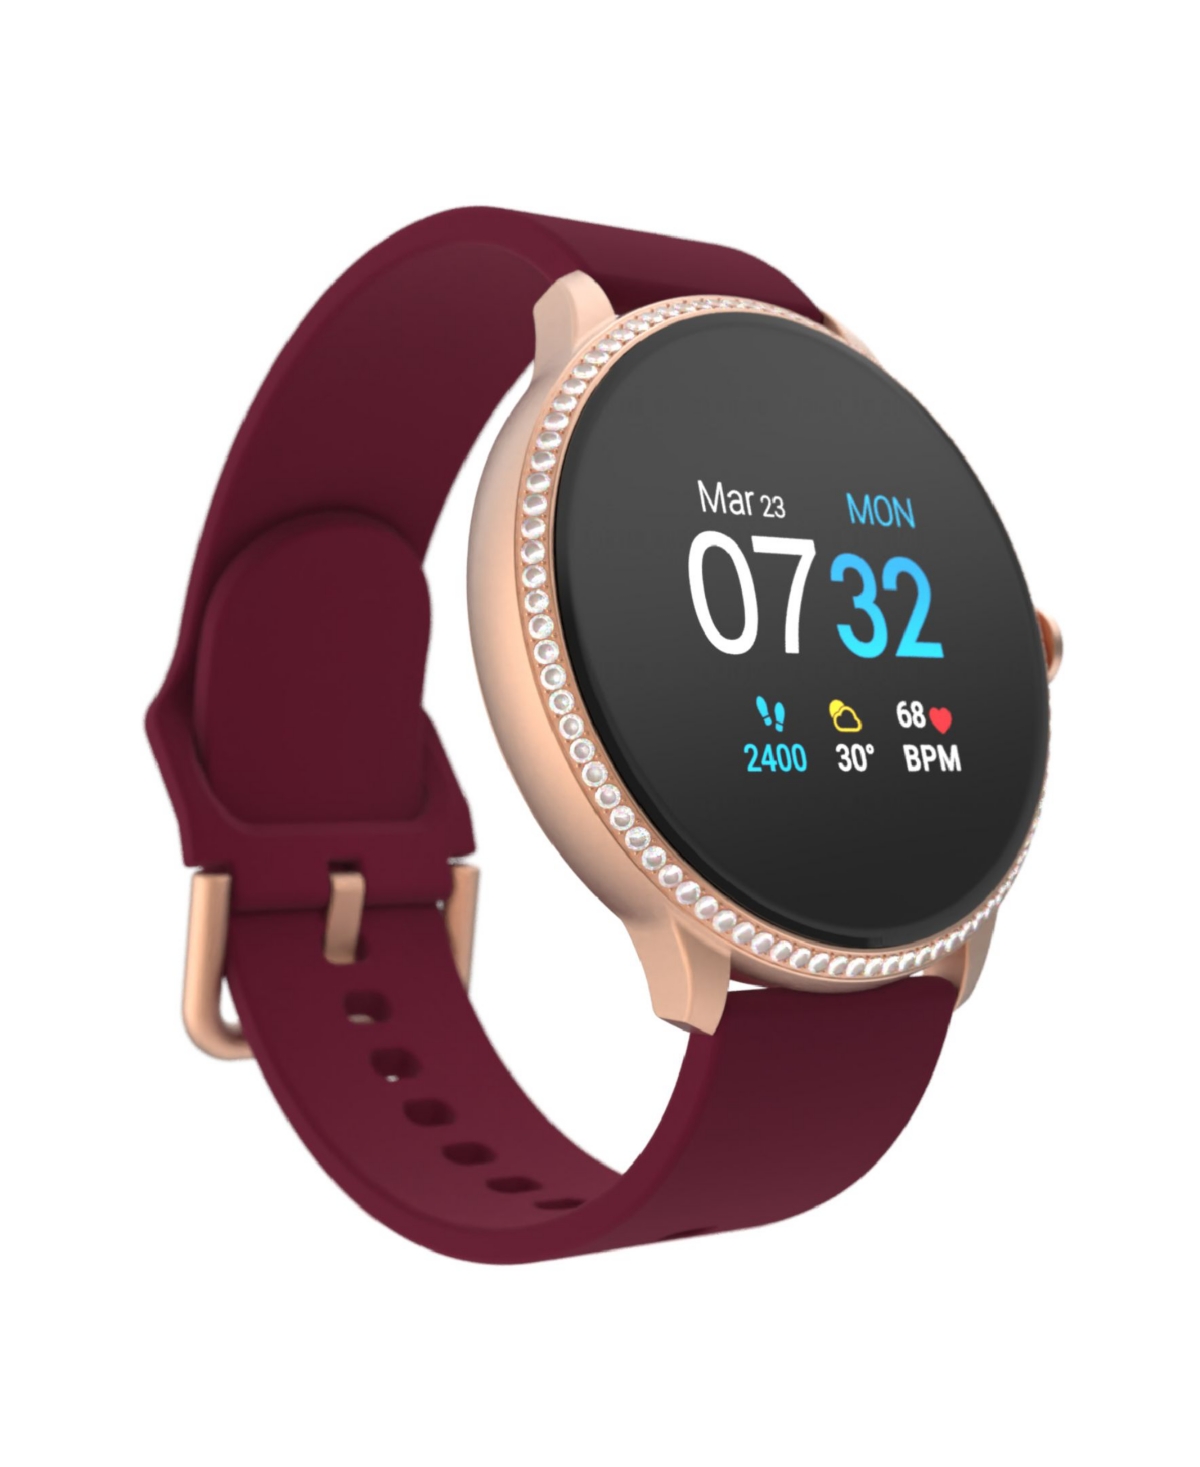 Itouch Sport 3 Women's Special Edition Touchscreen Smartwatch: Rose Gold Crystal Case with Merlot Strap 45mm